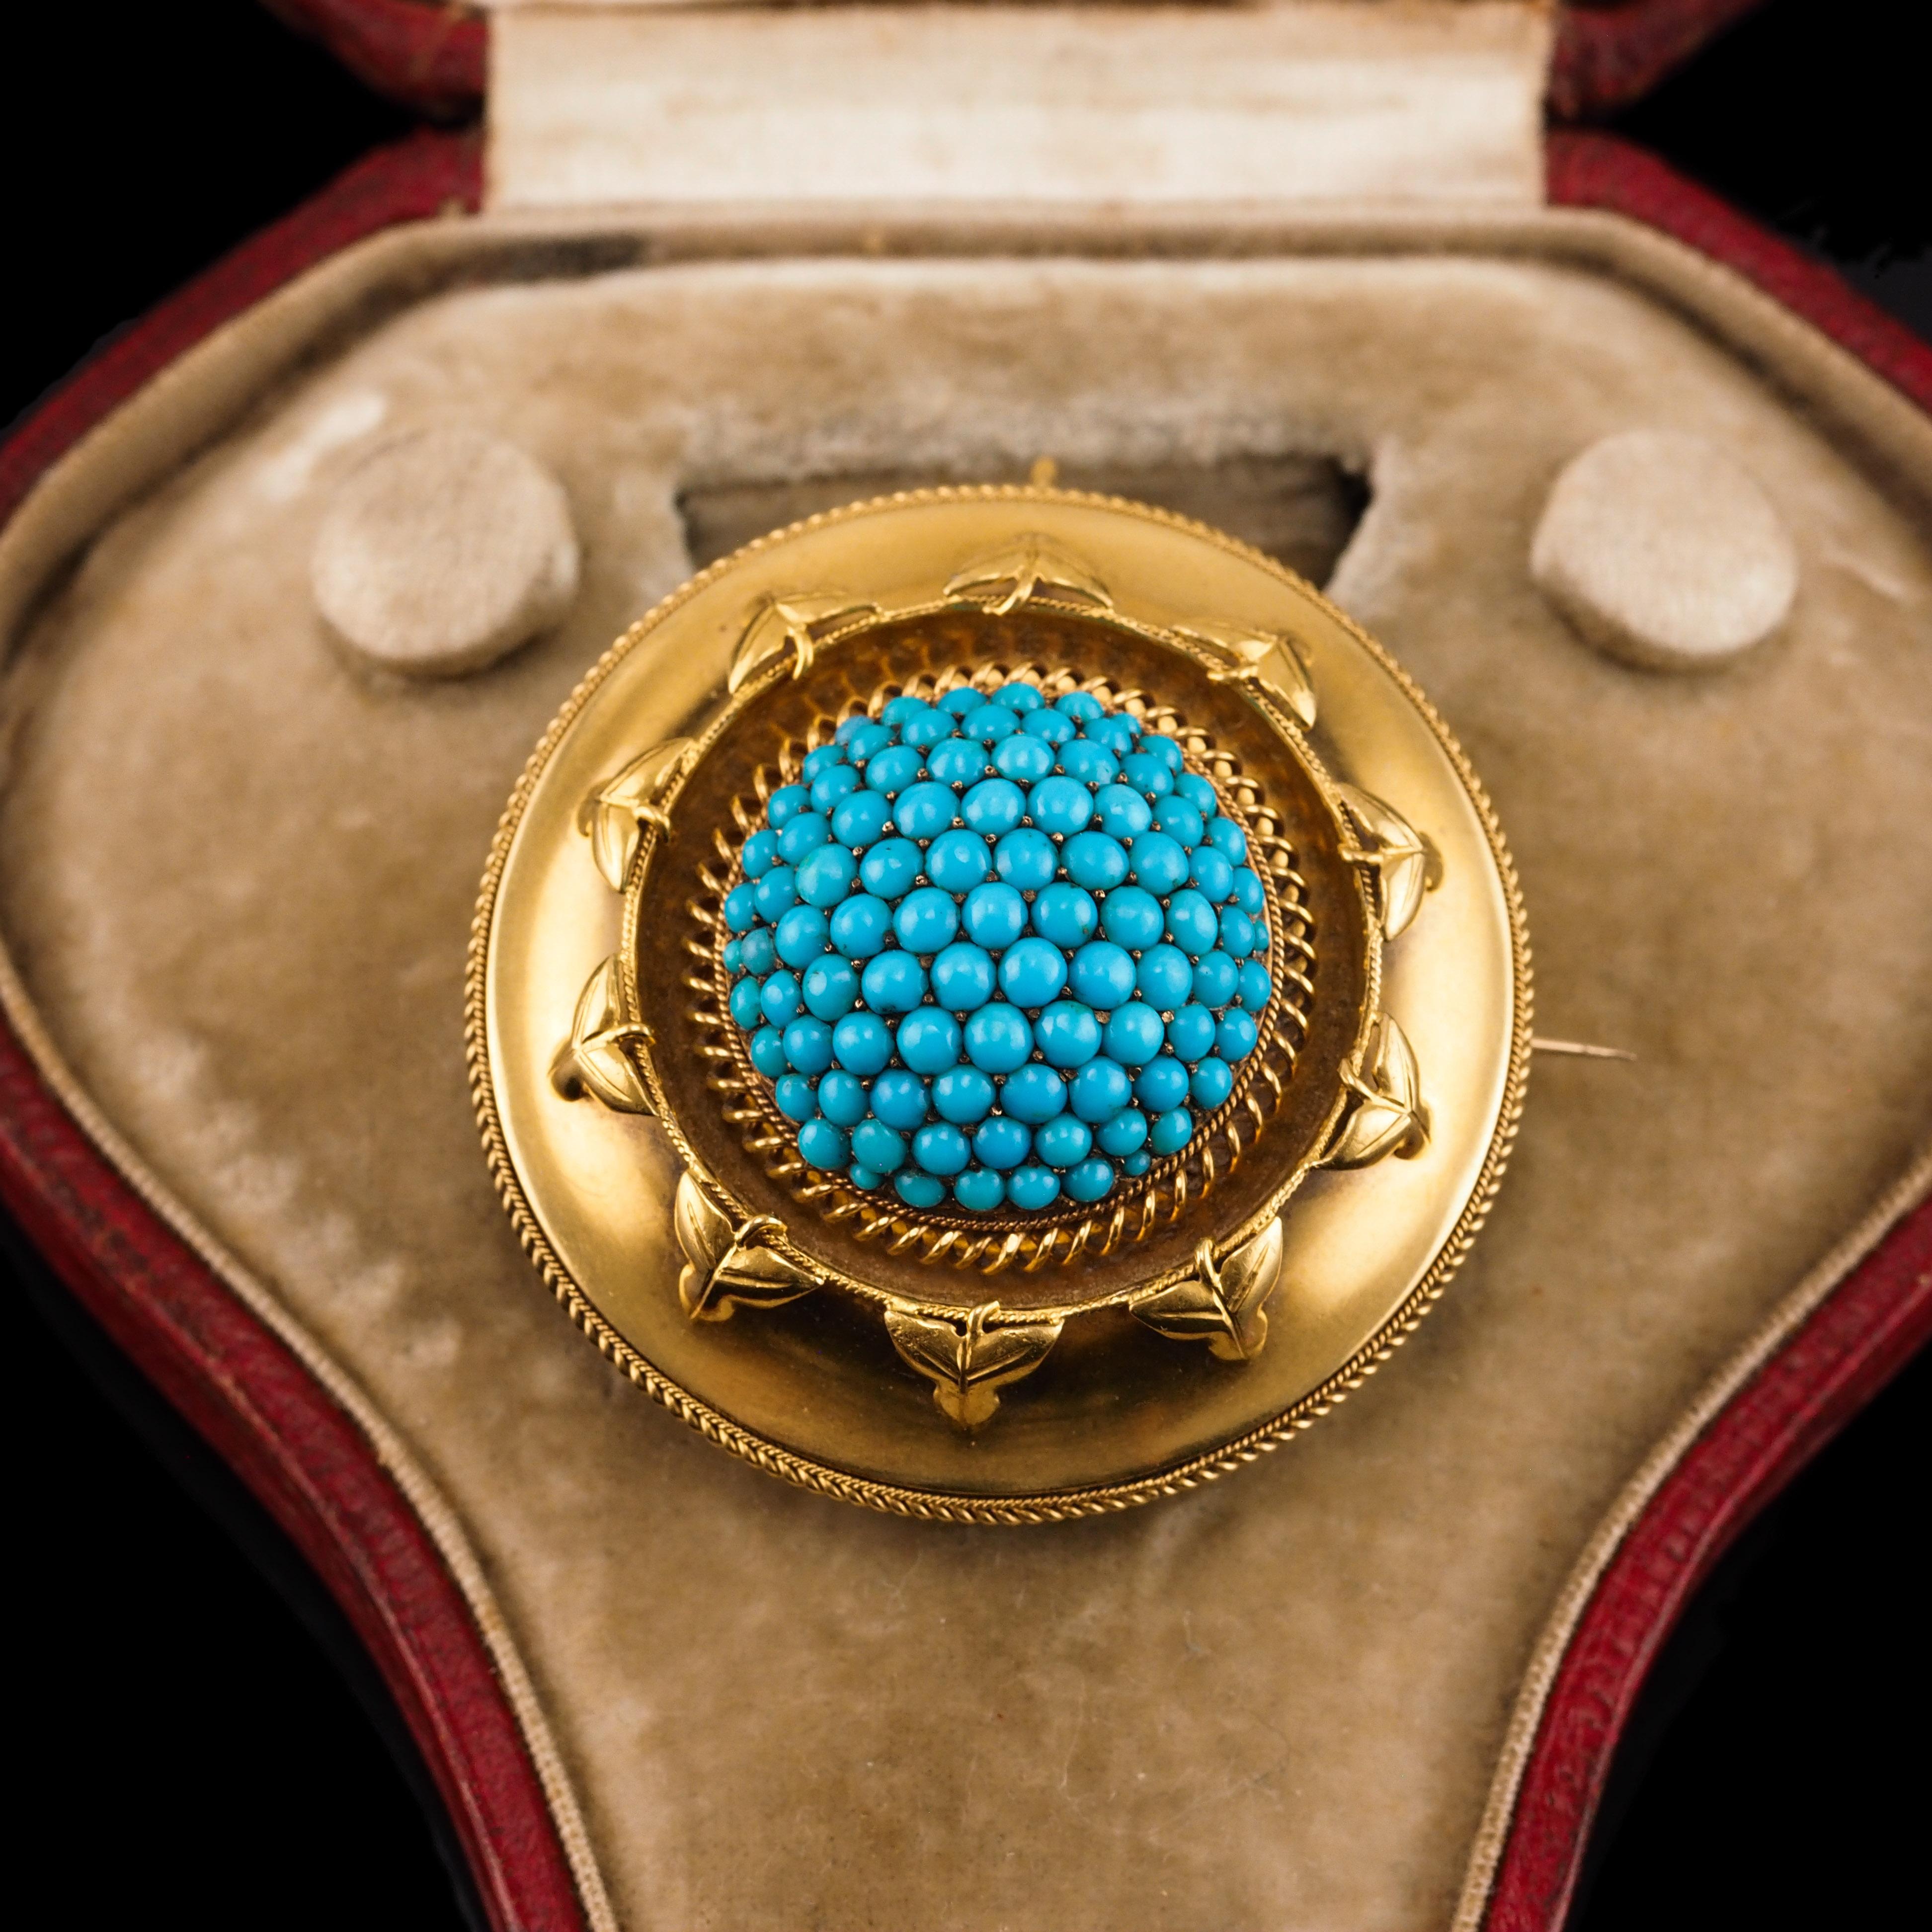 Antique Victorian Turquoise Pendant Necklace Brooch 18K Gold Etruscan c.1880 For Sale 6